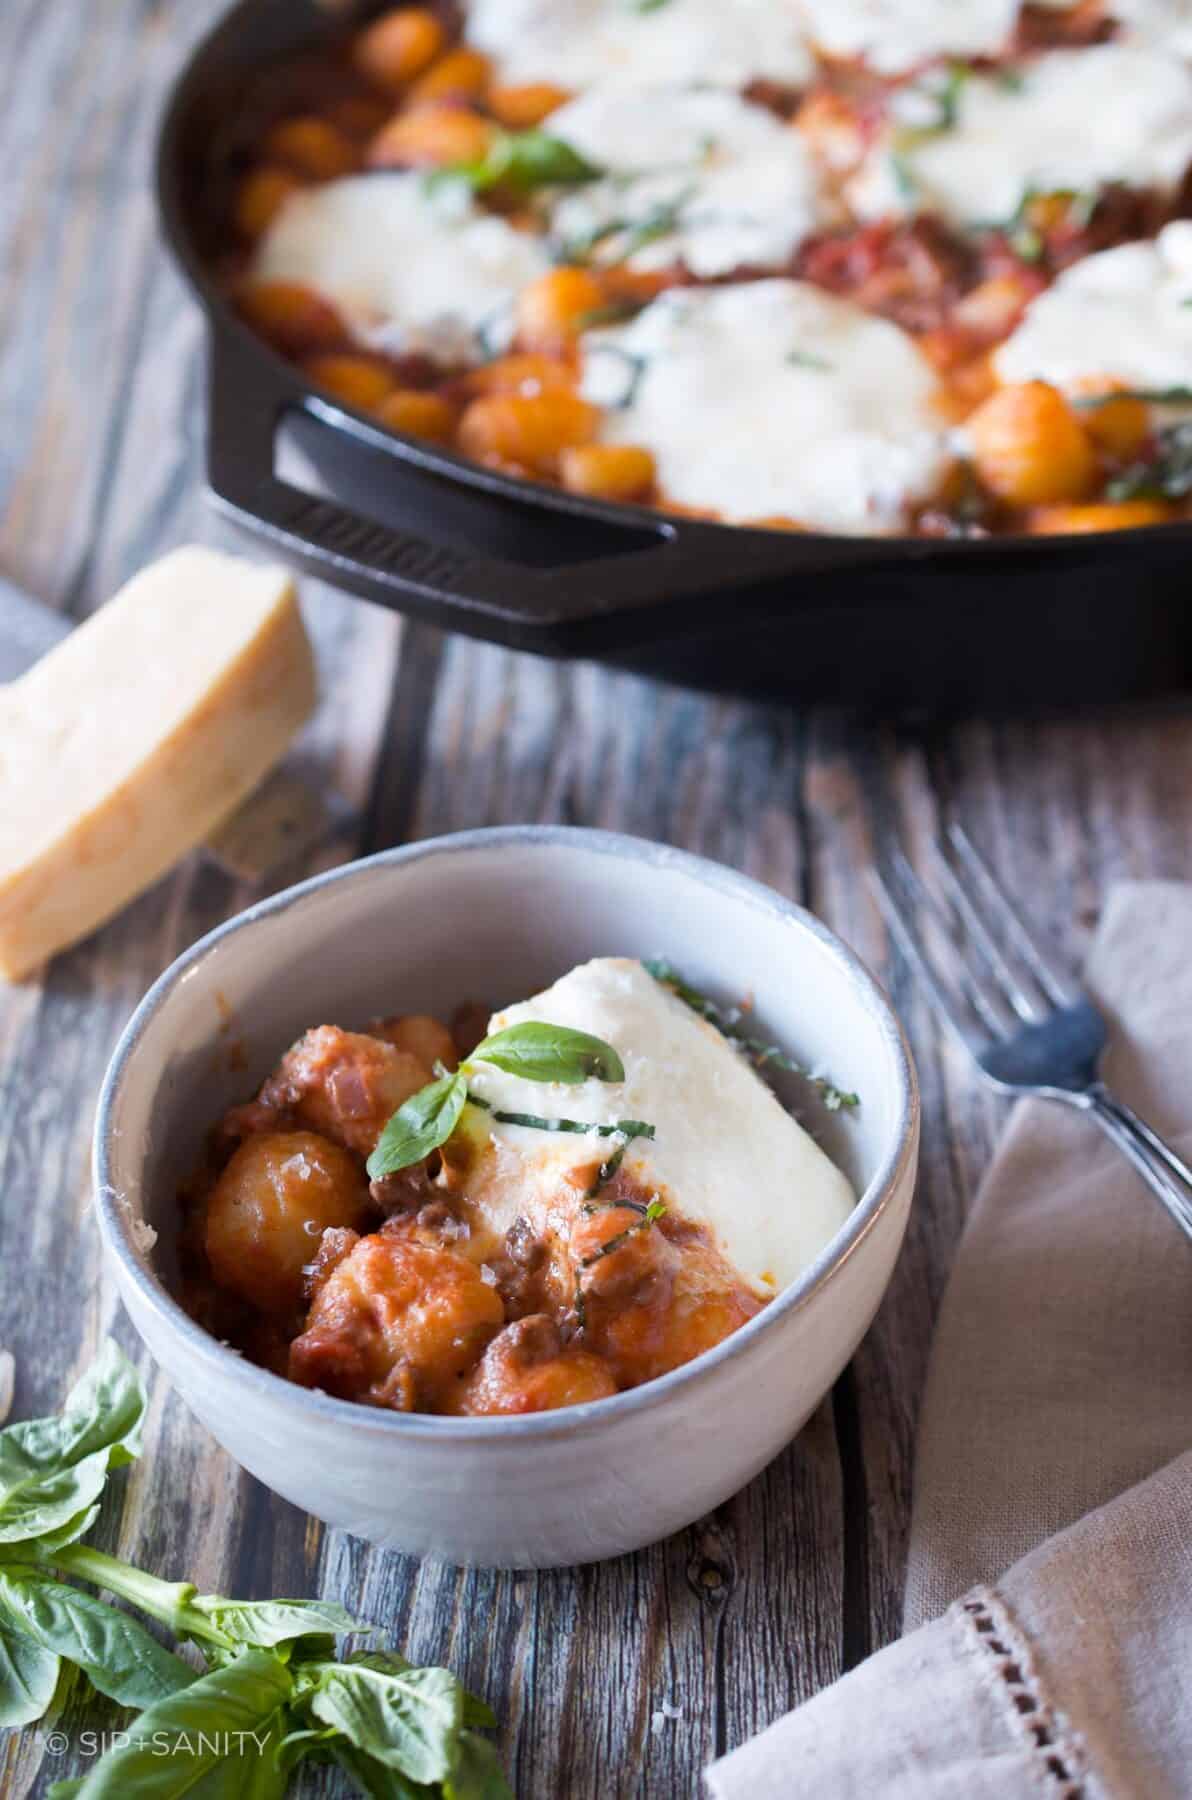 A small bowl of gnocchi with tomato sauce and mozzarella next to a cast iron skillet filled with more gnocchi.